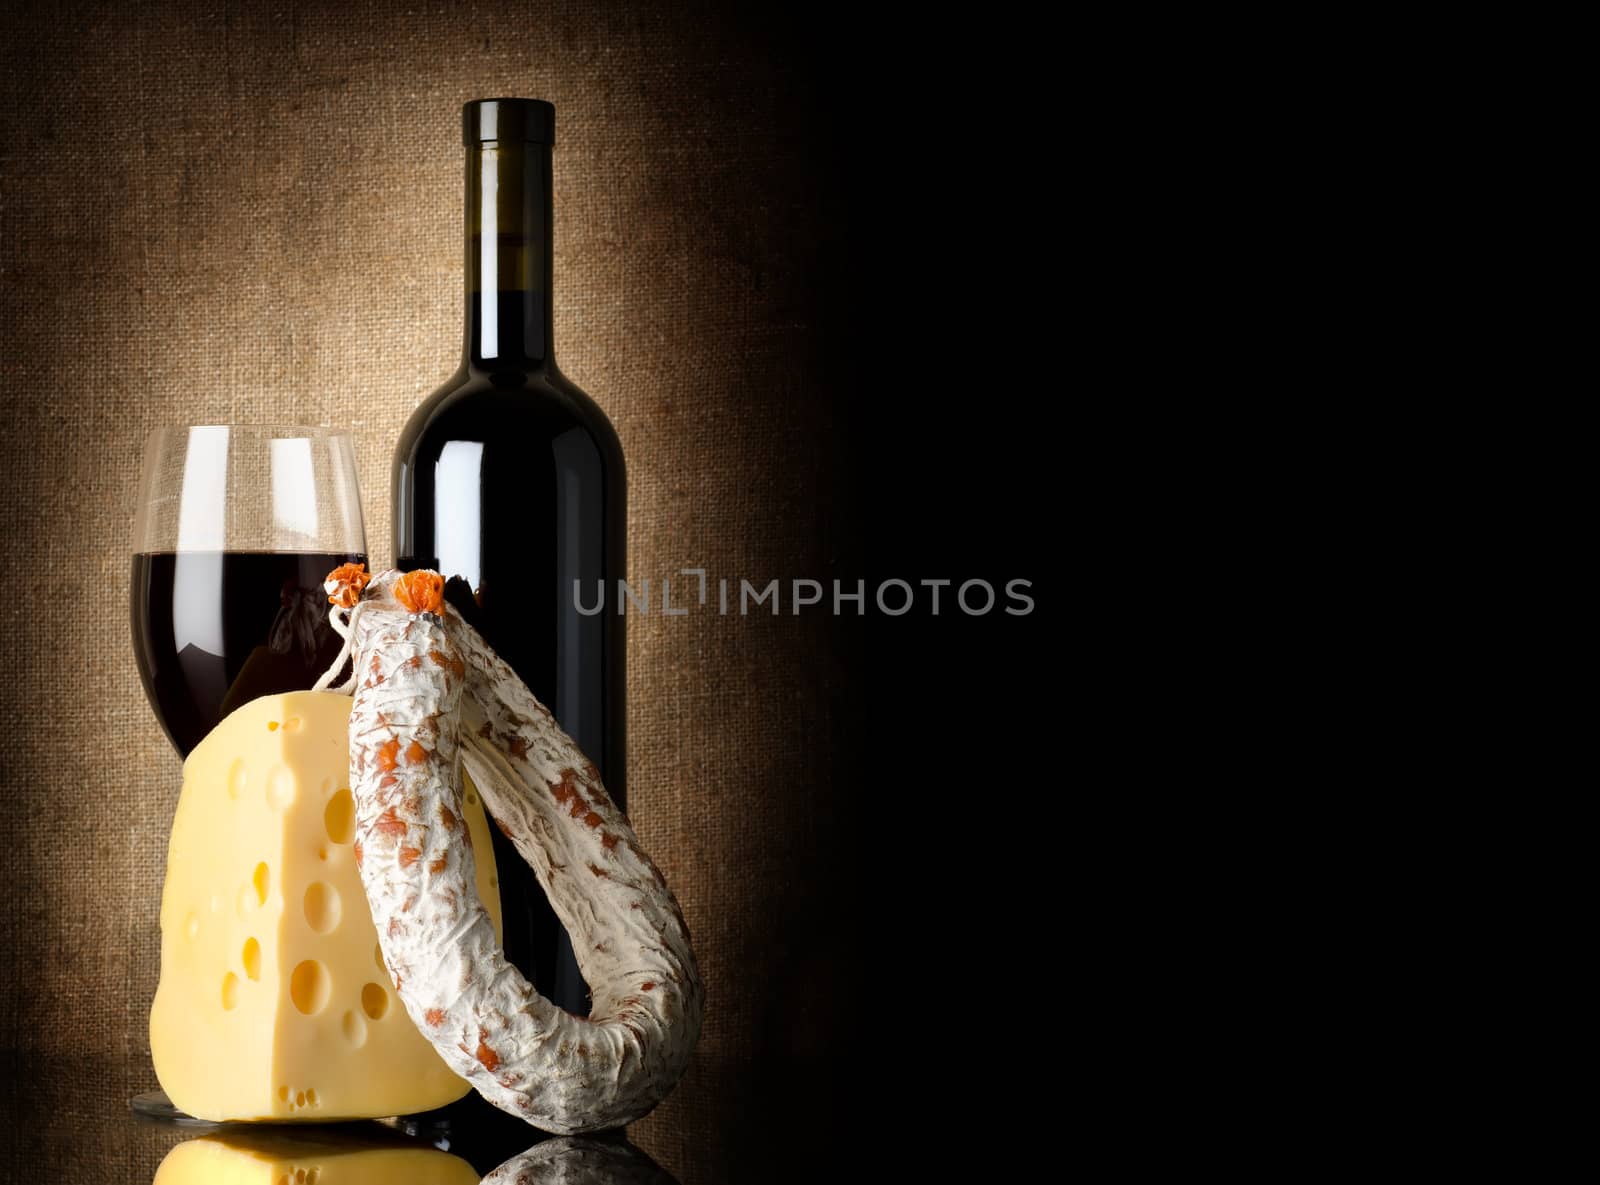 Wine, cheese and salami on a background of old canvas